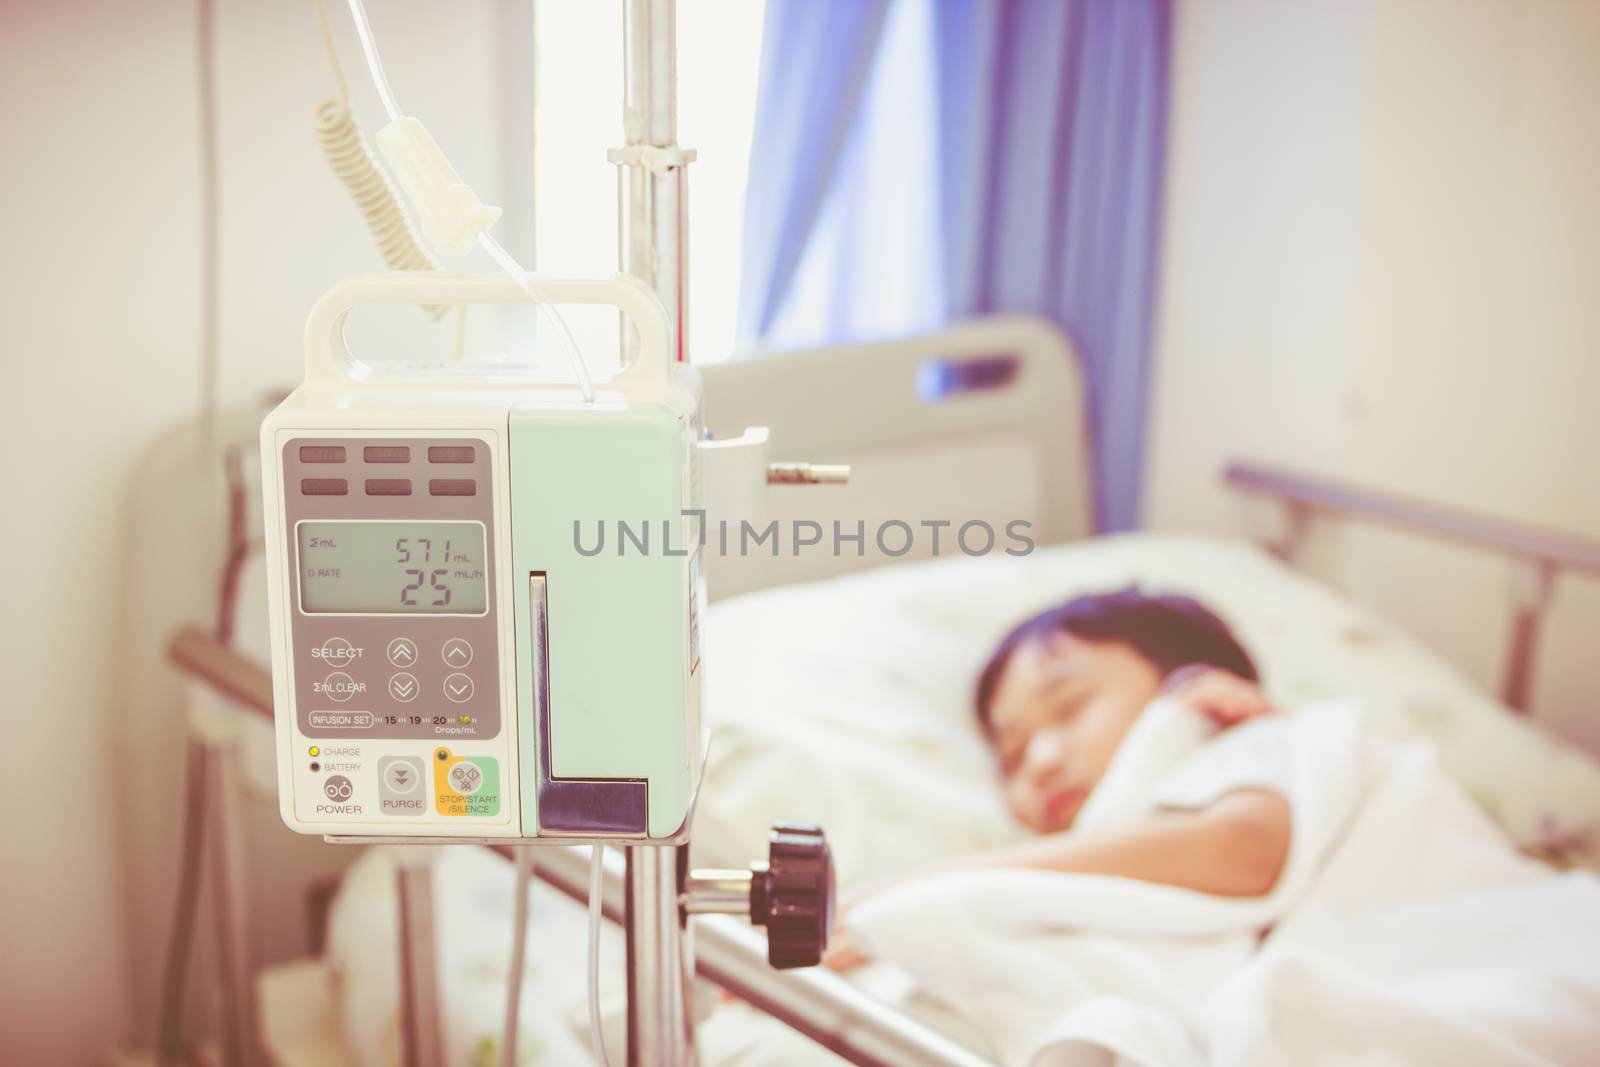 Asian boy lying on sickbed with infusion pump intravenous IV dri by kdshutterman